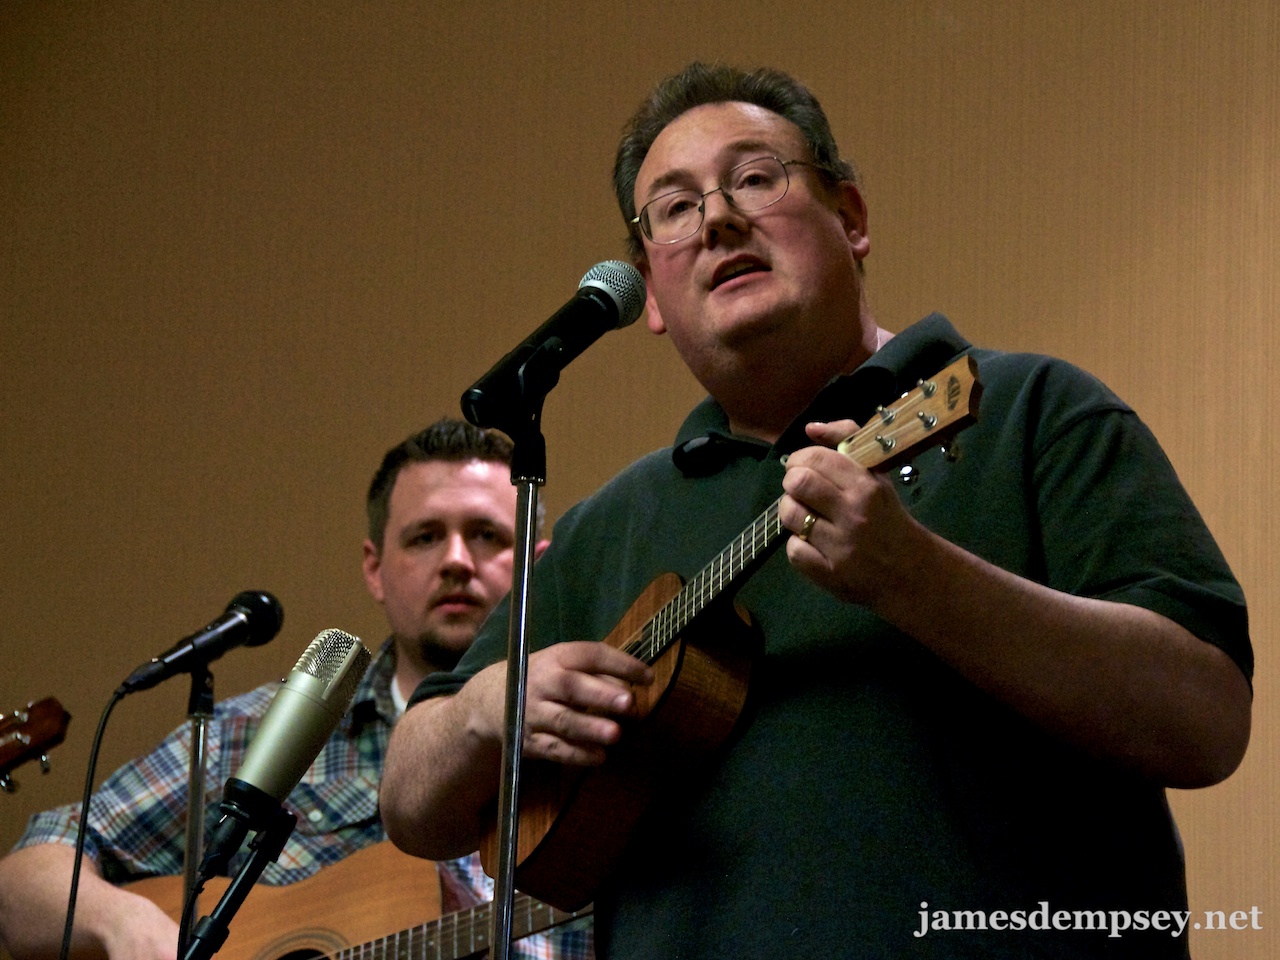 James Dempsey playing ukulele and singing and Ben Scheirman playing the guitar